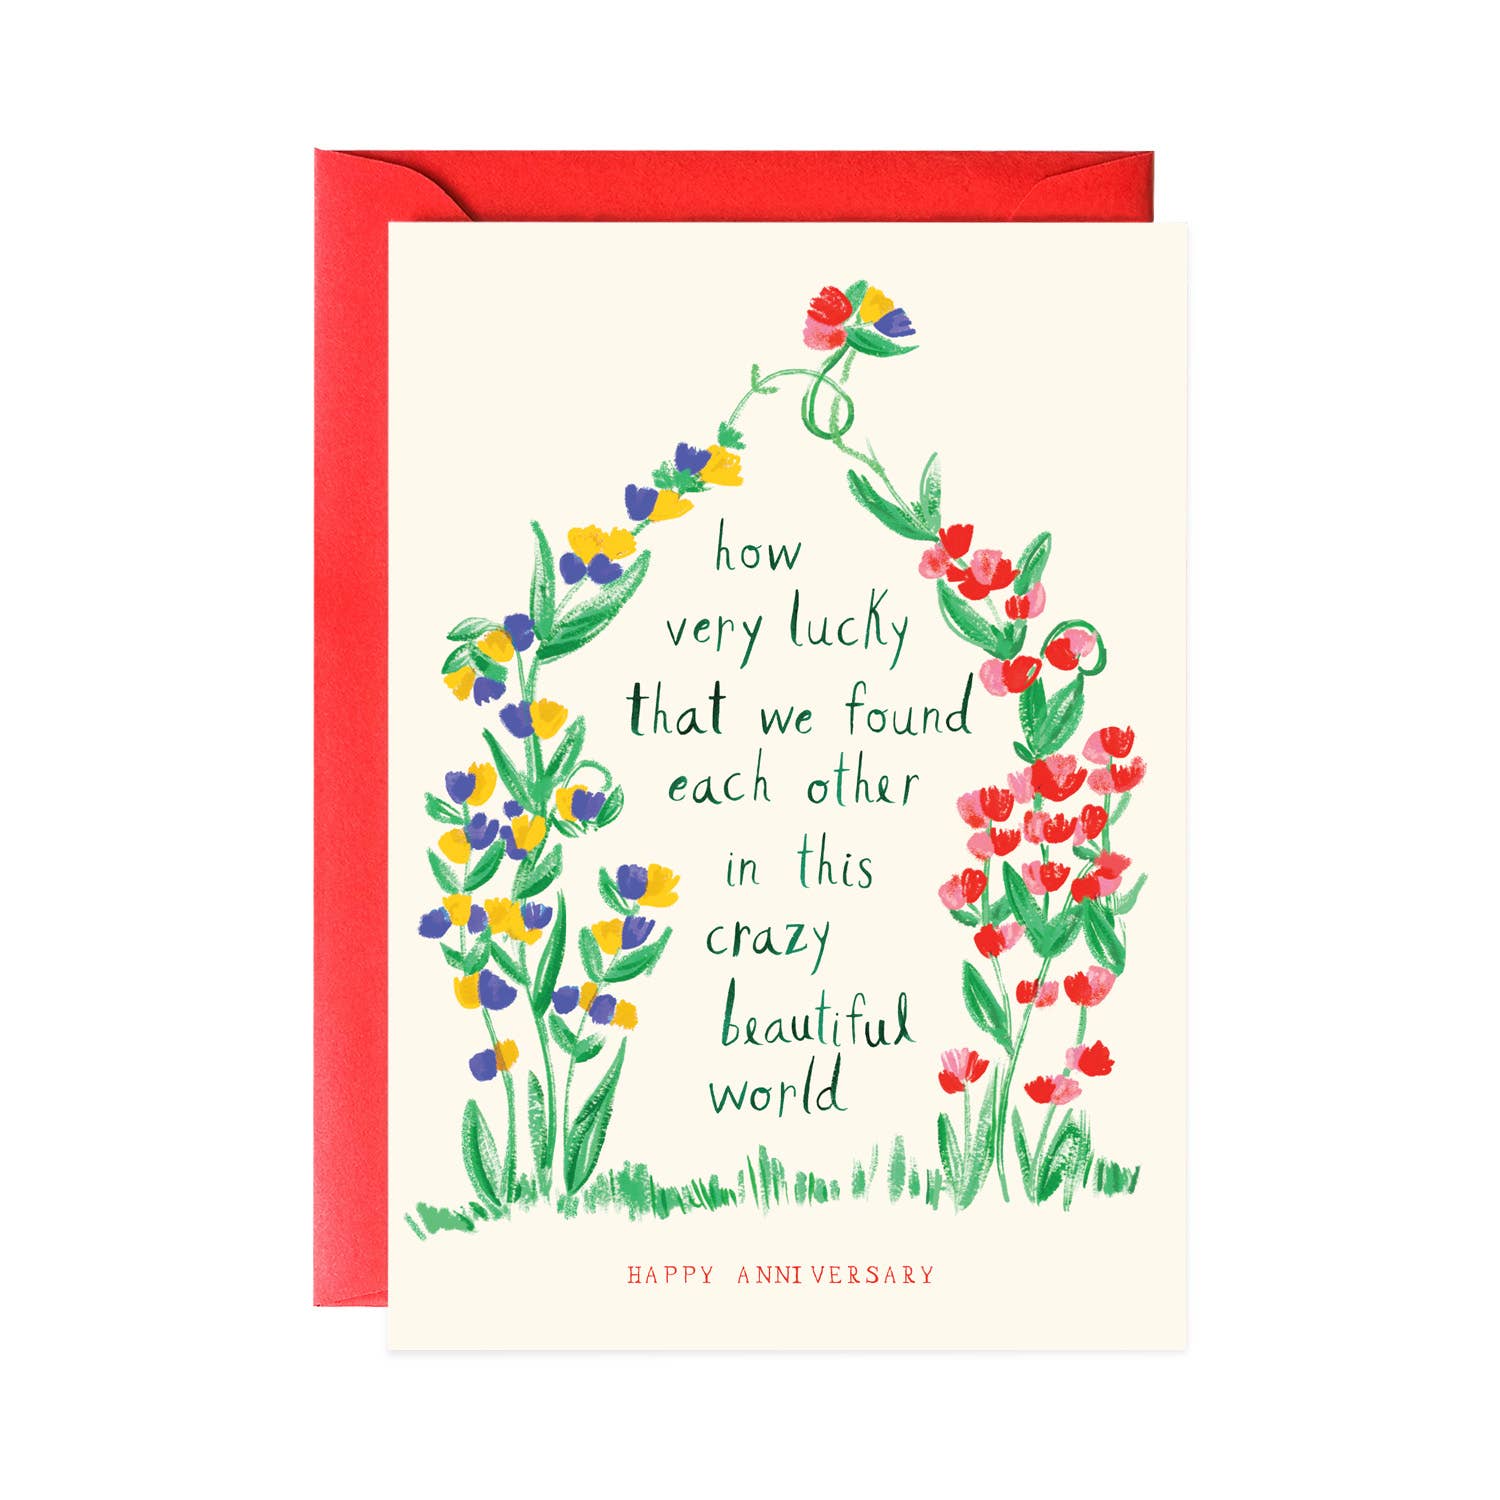 Like Roses and Clover - Greeting Card